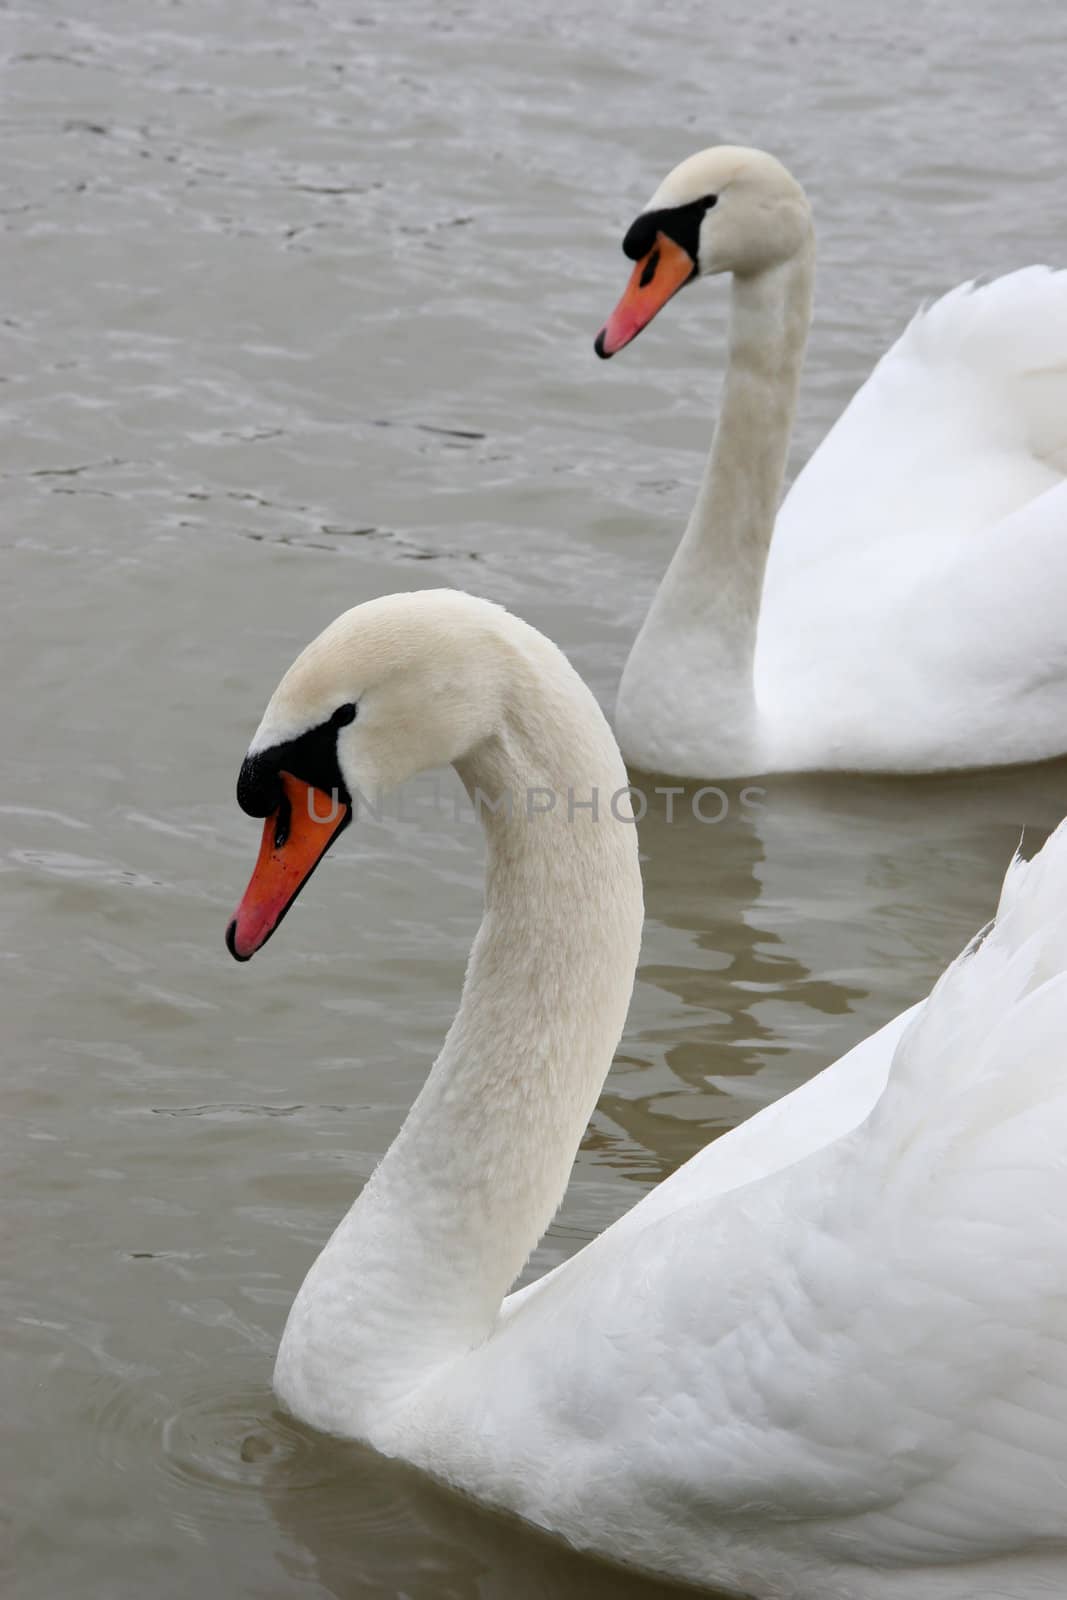 White swan,  symbol of silence and grace